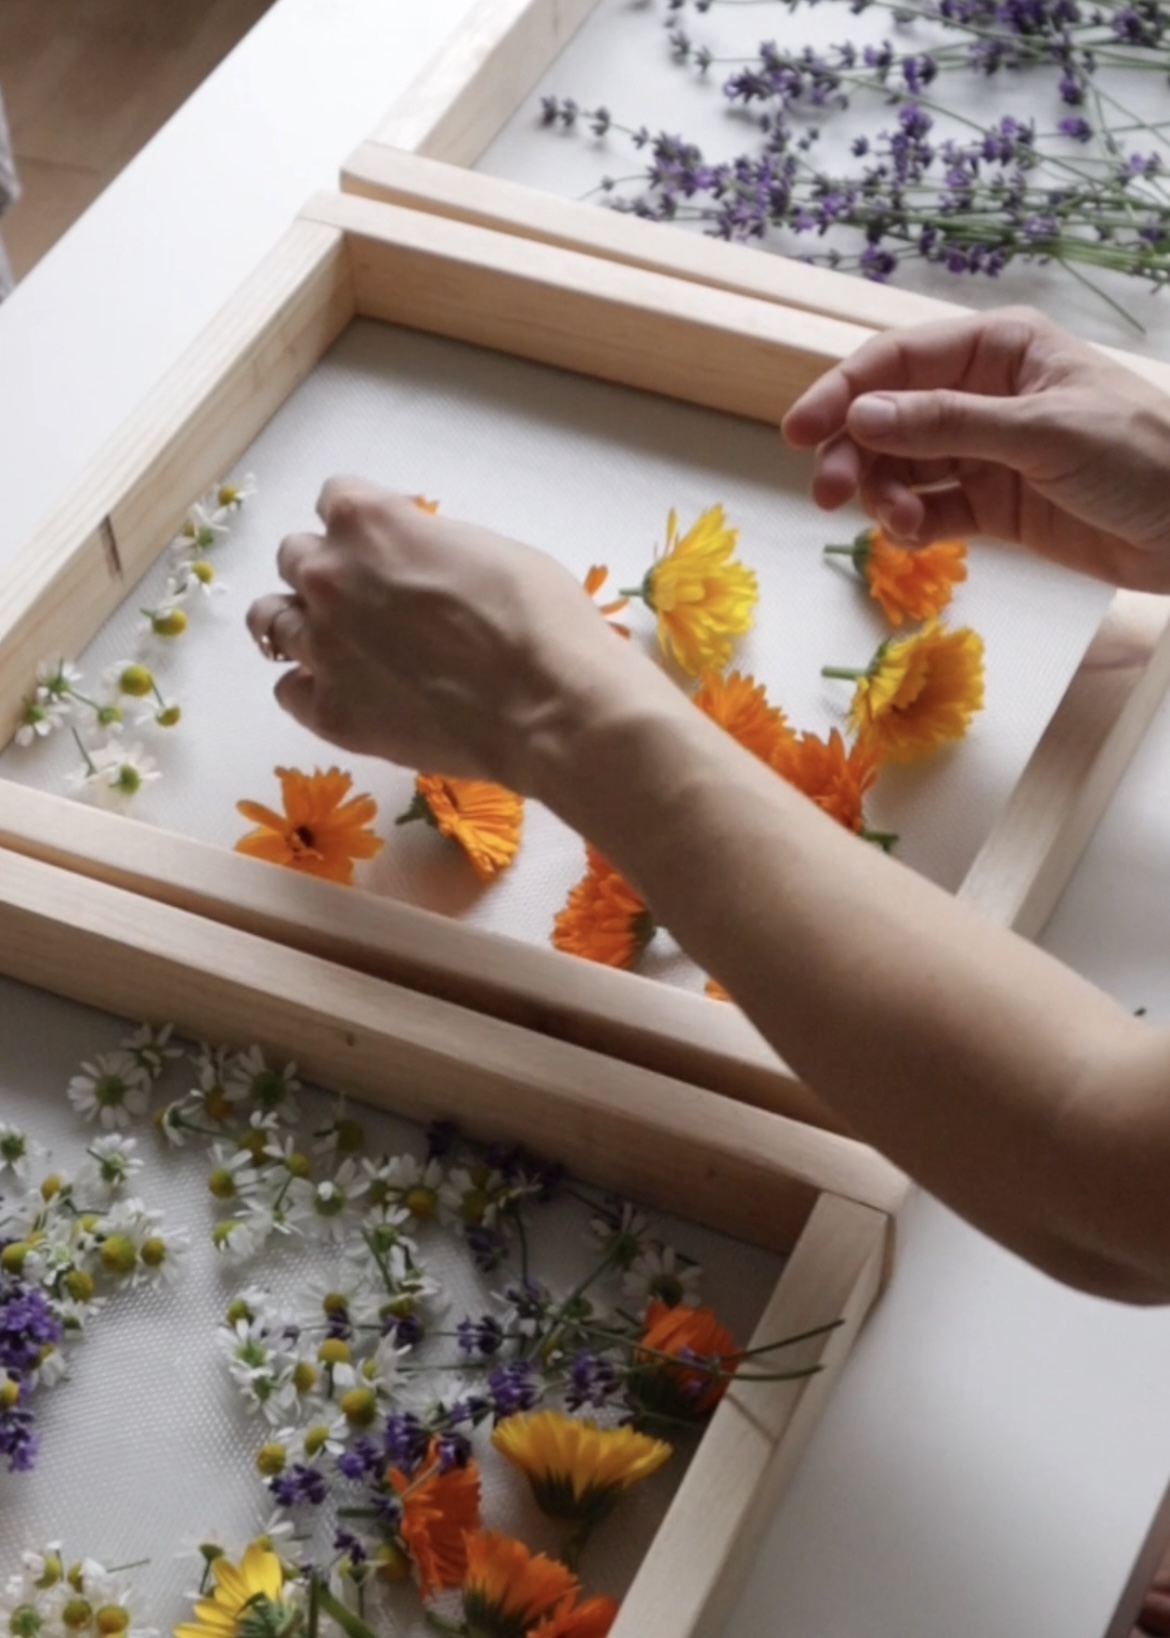 A woman sorts an array of flowers onto three drying racks.